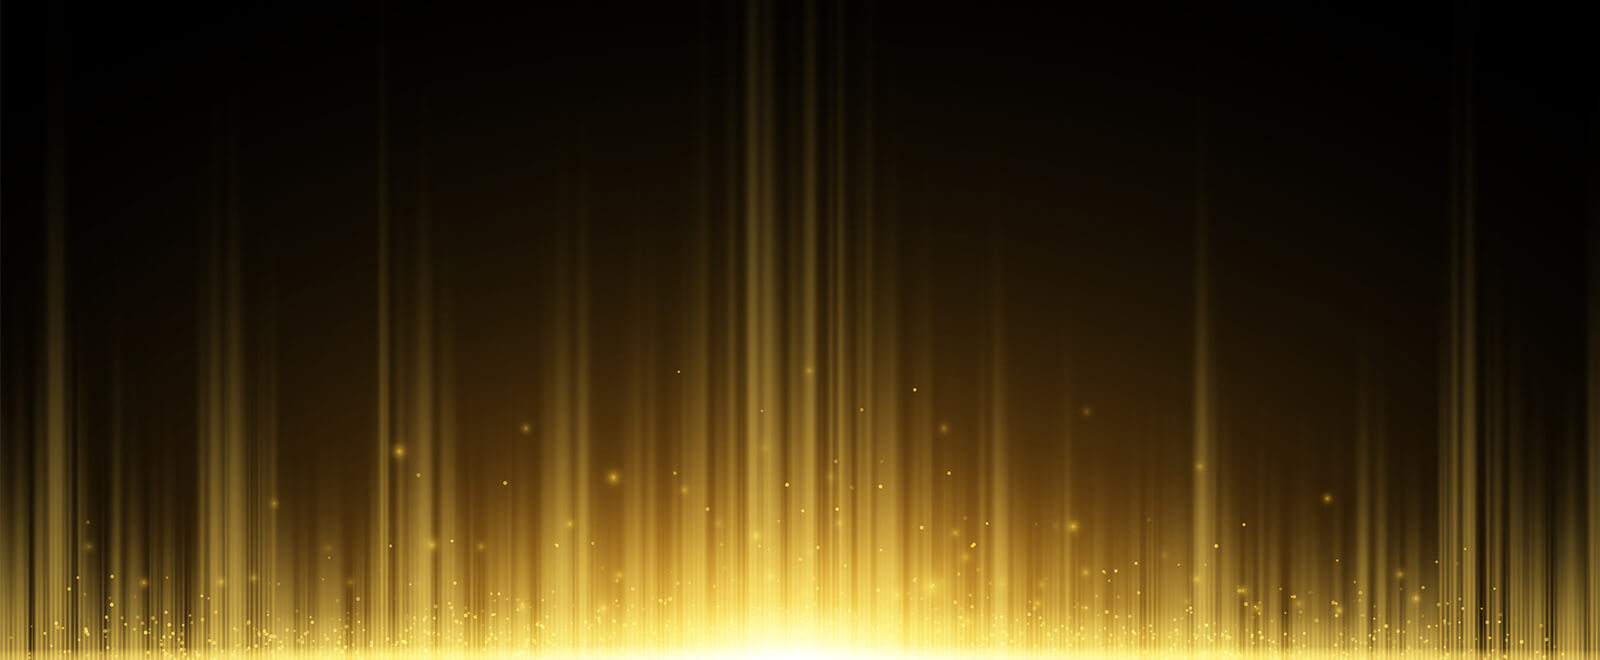 Abstract background, gray stage curtain with golden shadows of light at the bottom